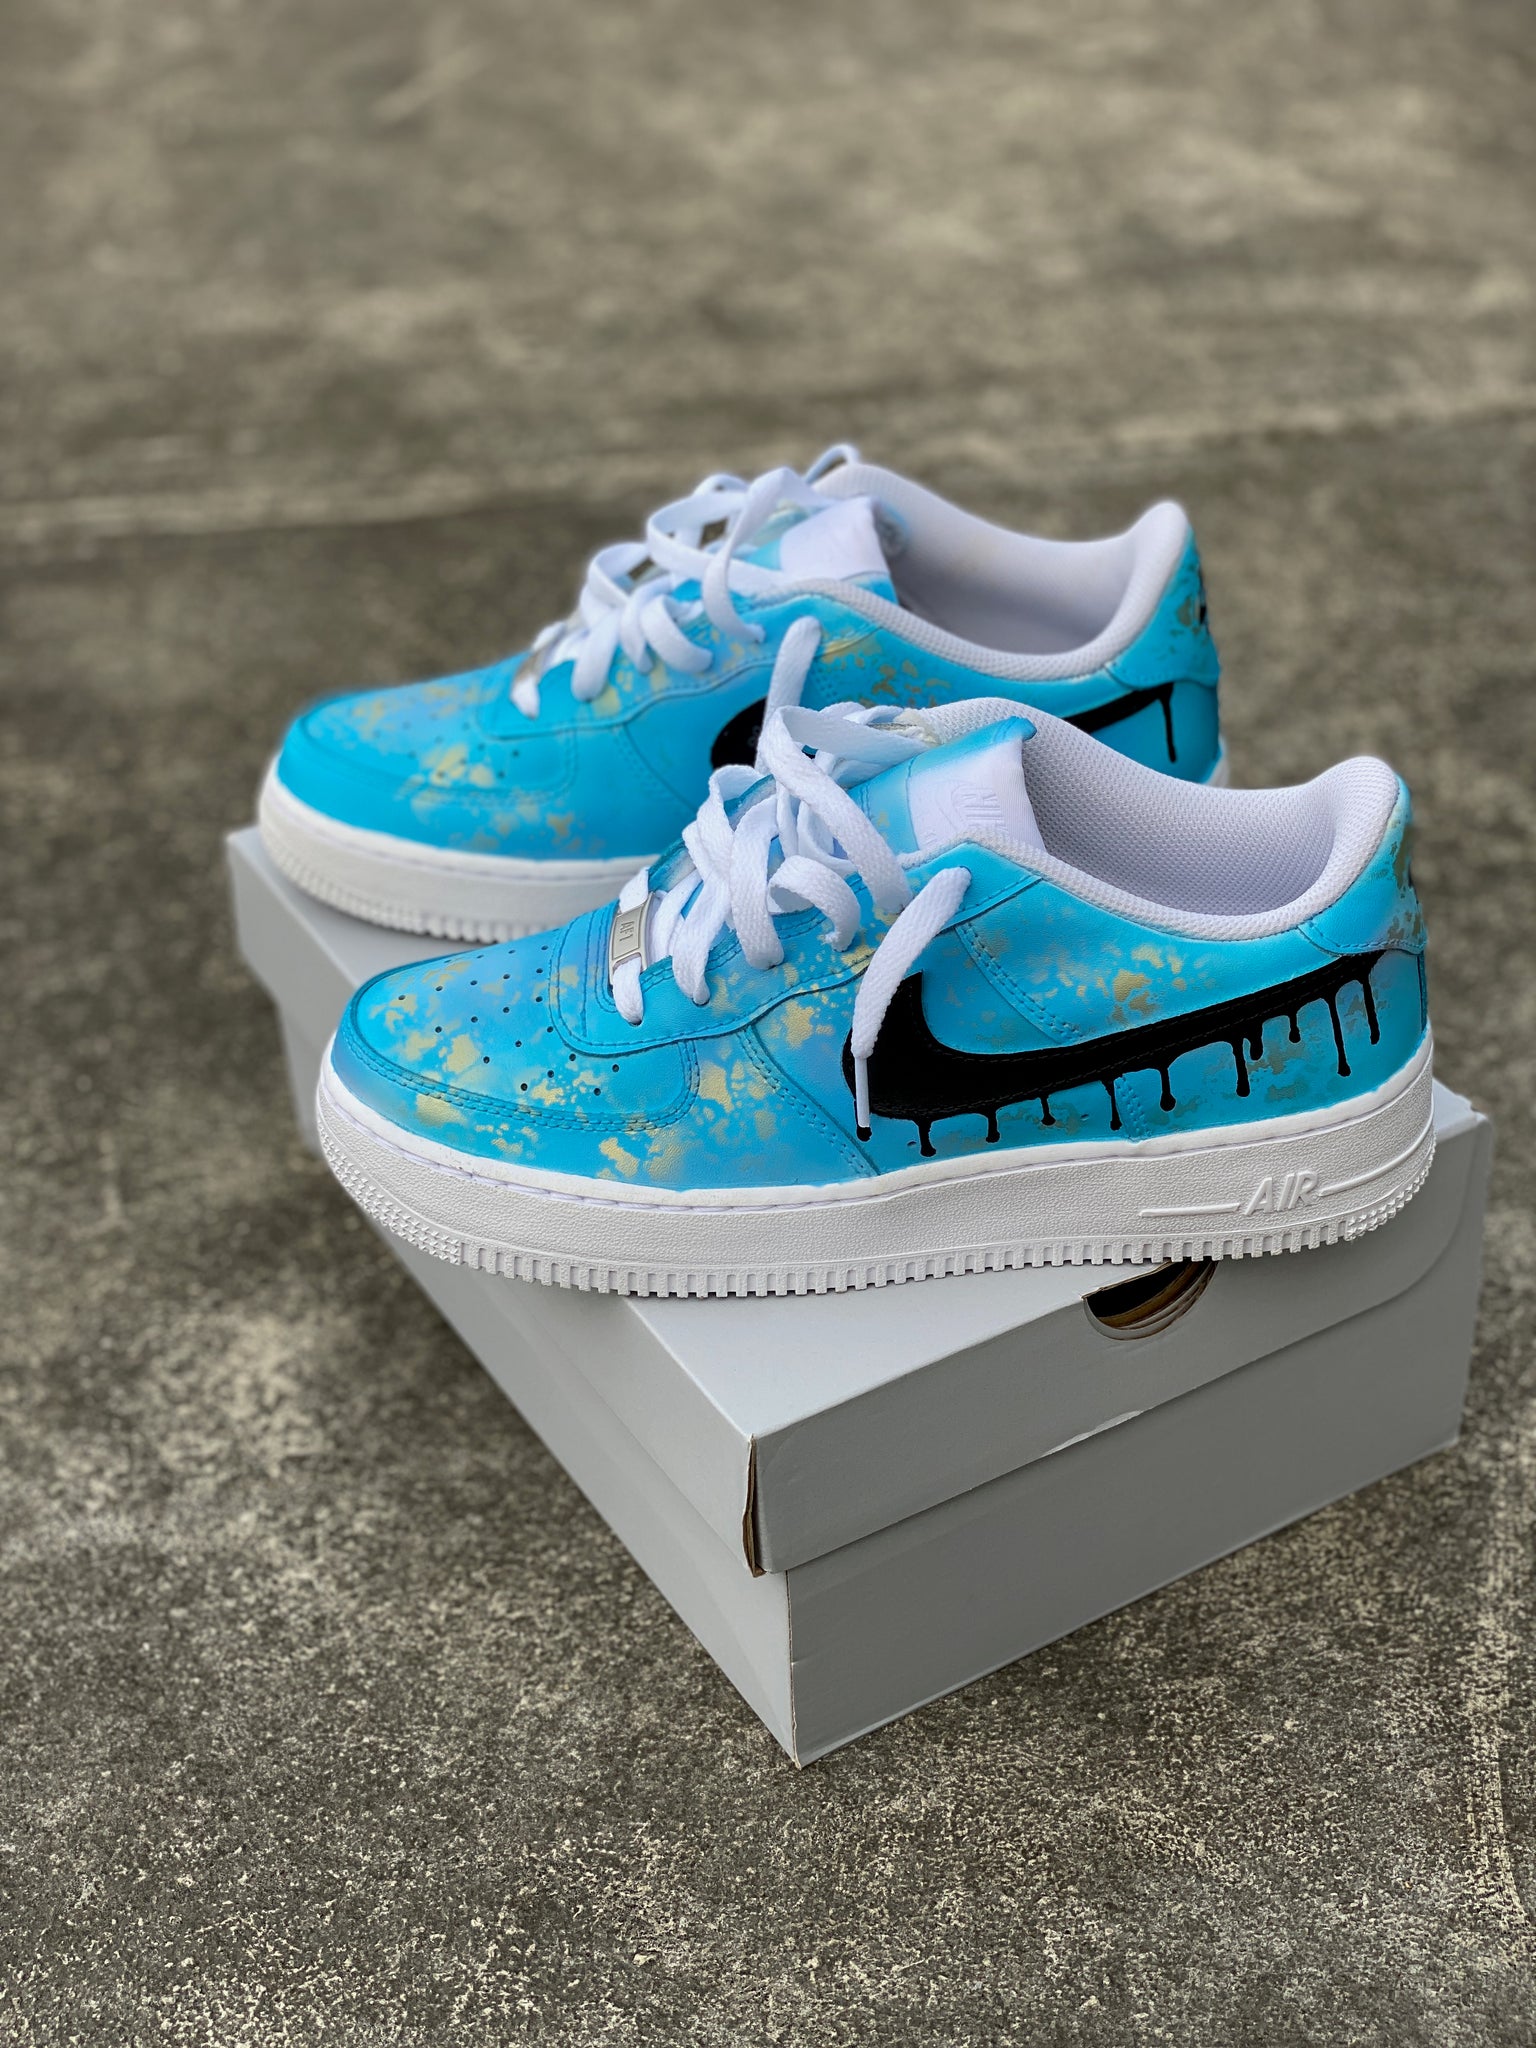 Custom Nike Air Force One 1 Drip Drippy Oreo Speckled Sneakers